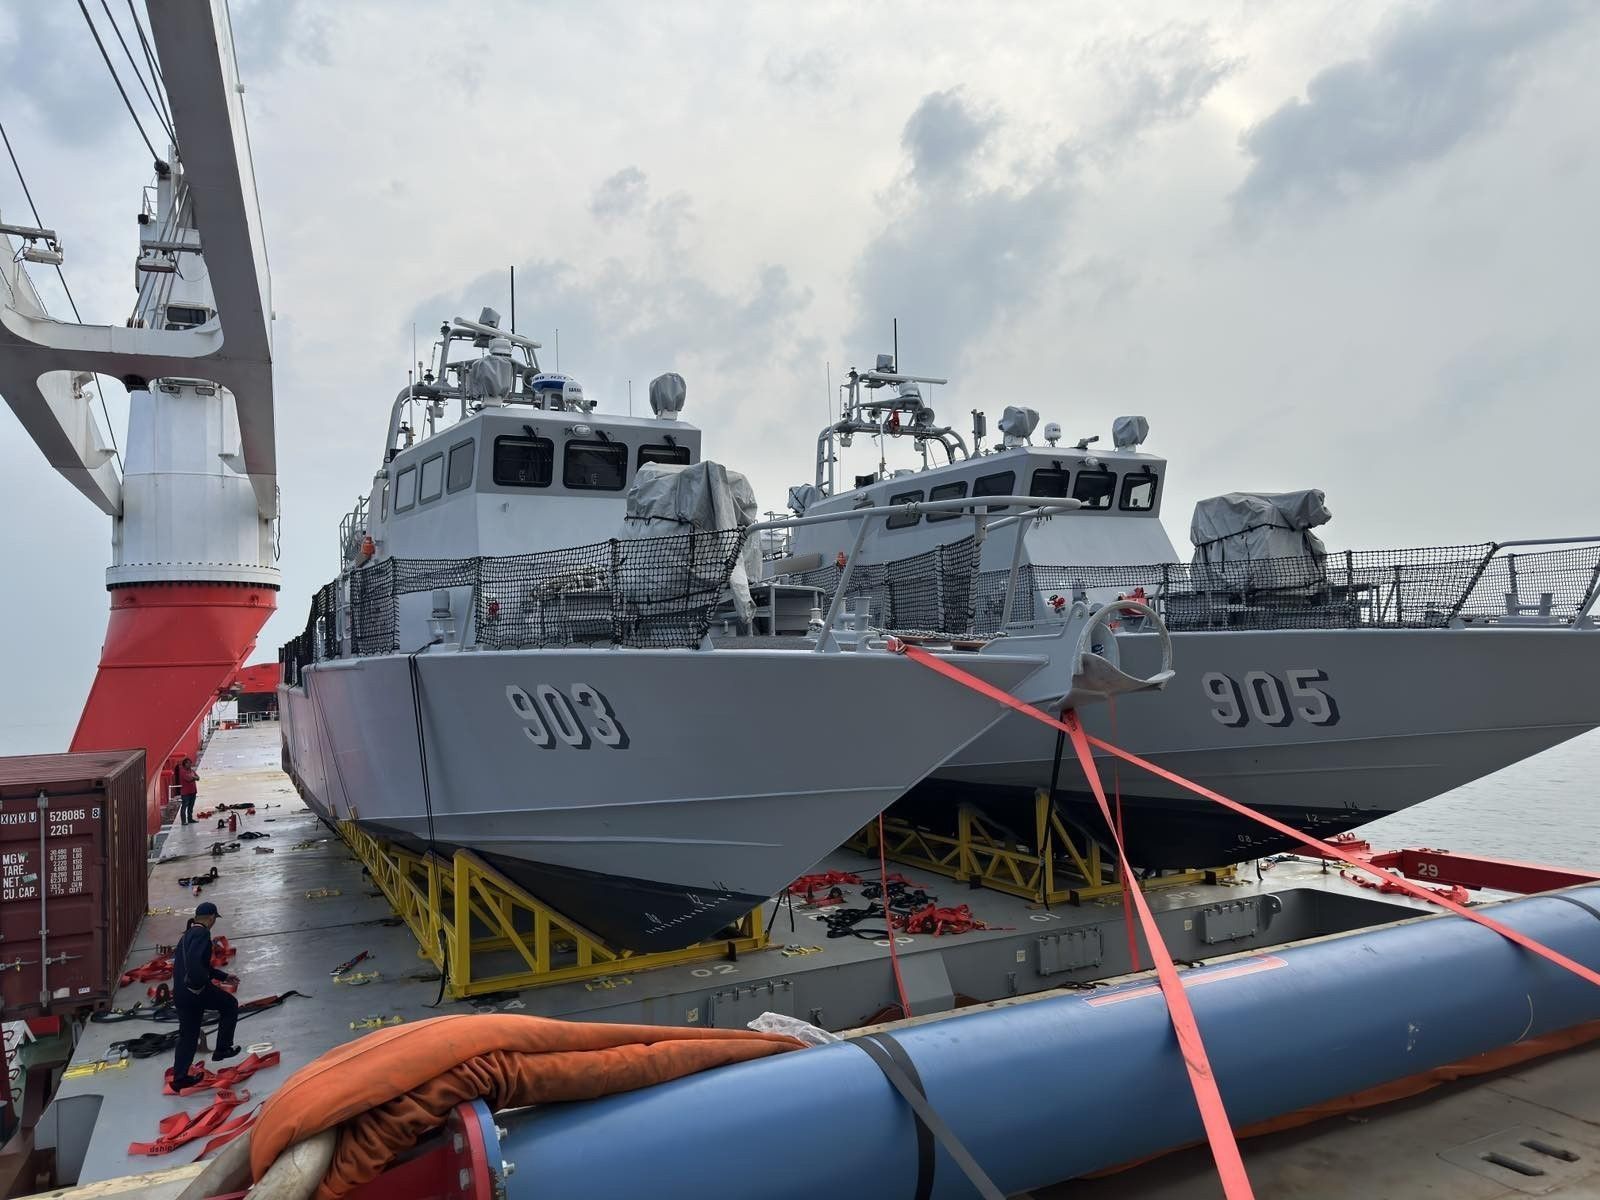 Navy names new missile-capable patrol boats after Marine Corps â��heroesâ��